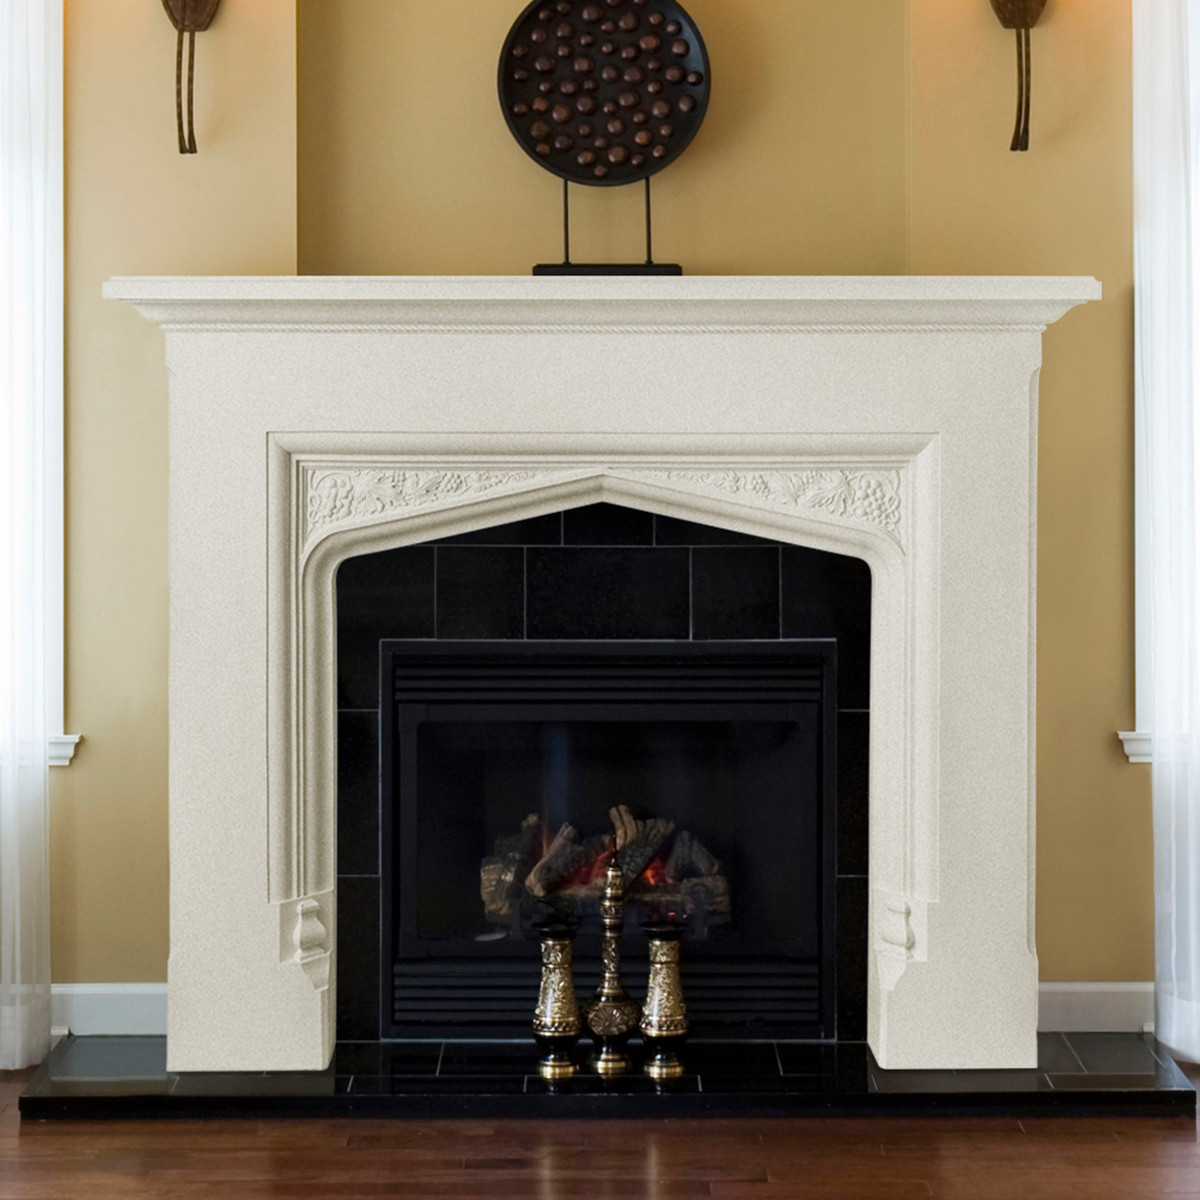 Duraflame Fireplace Awesome Arts and Crafts Fireplace Surround